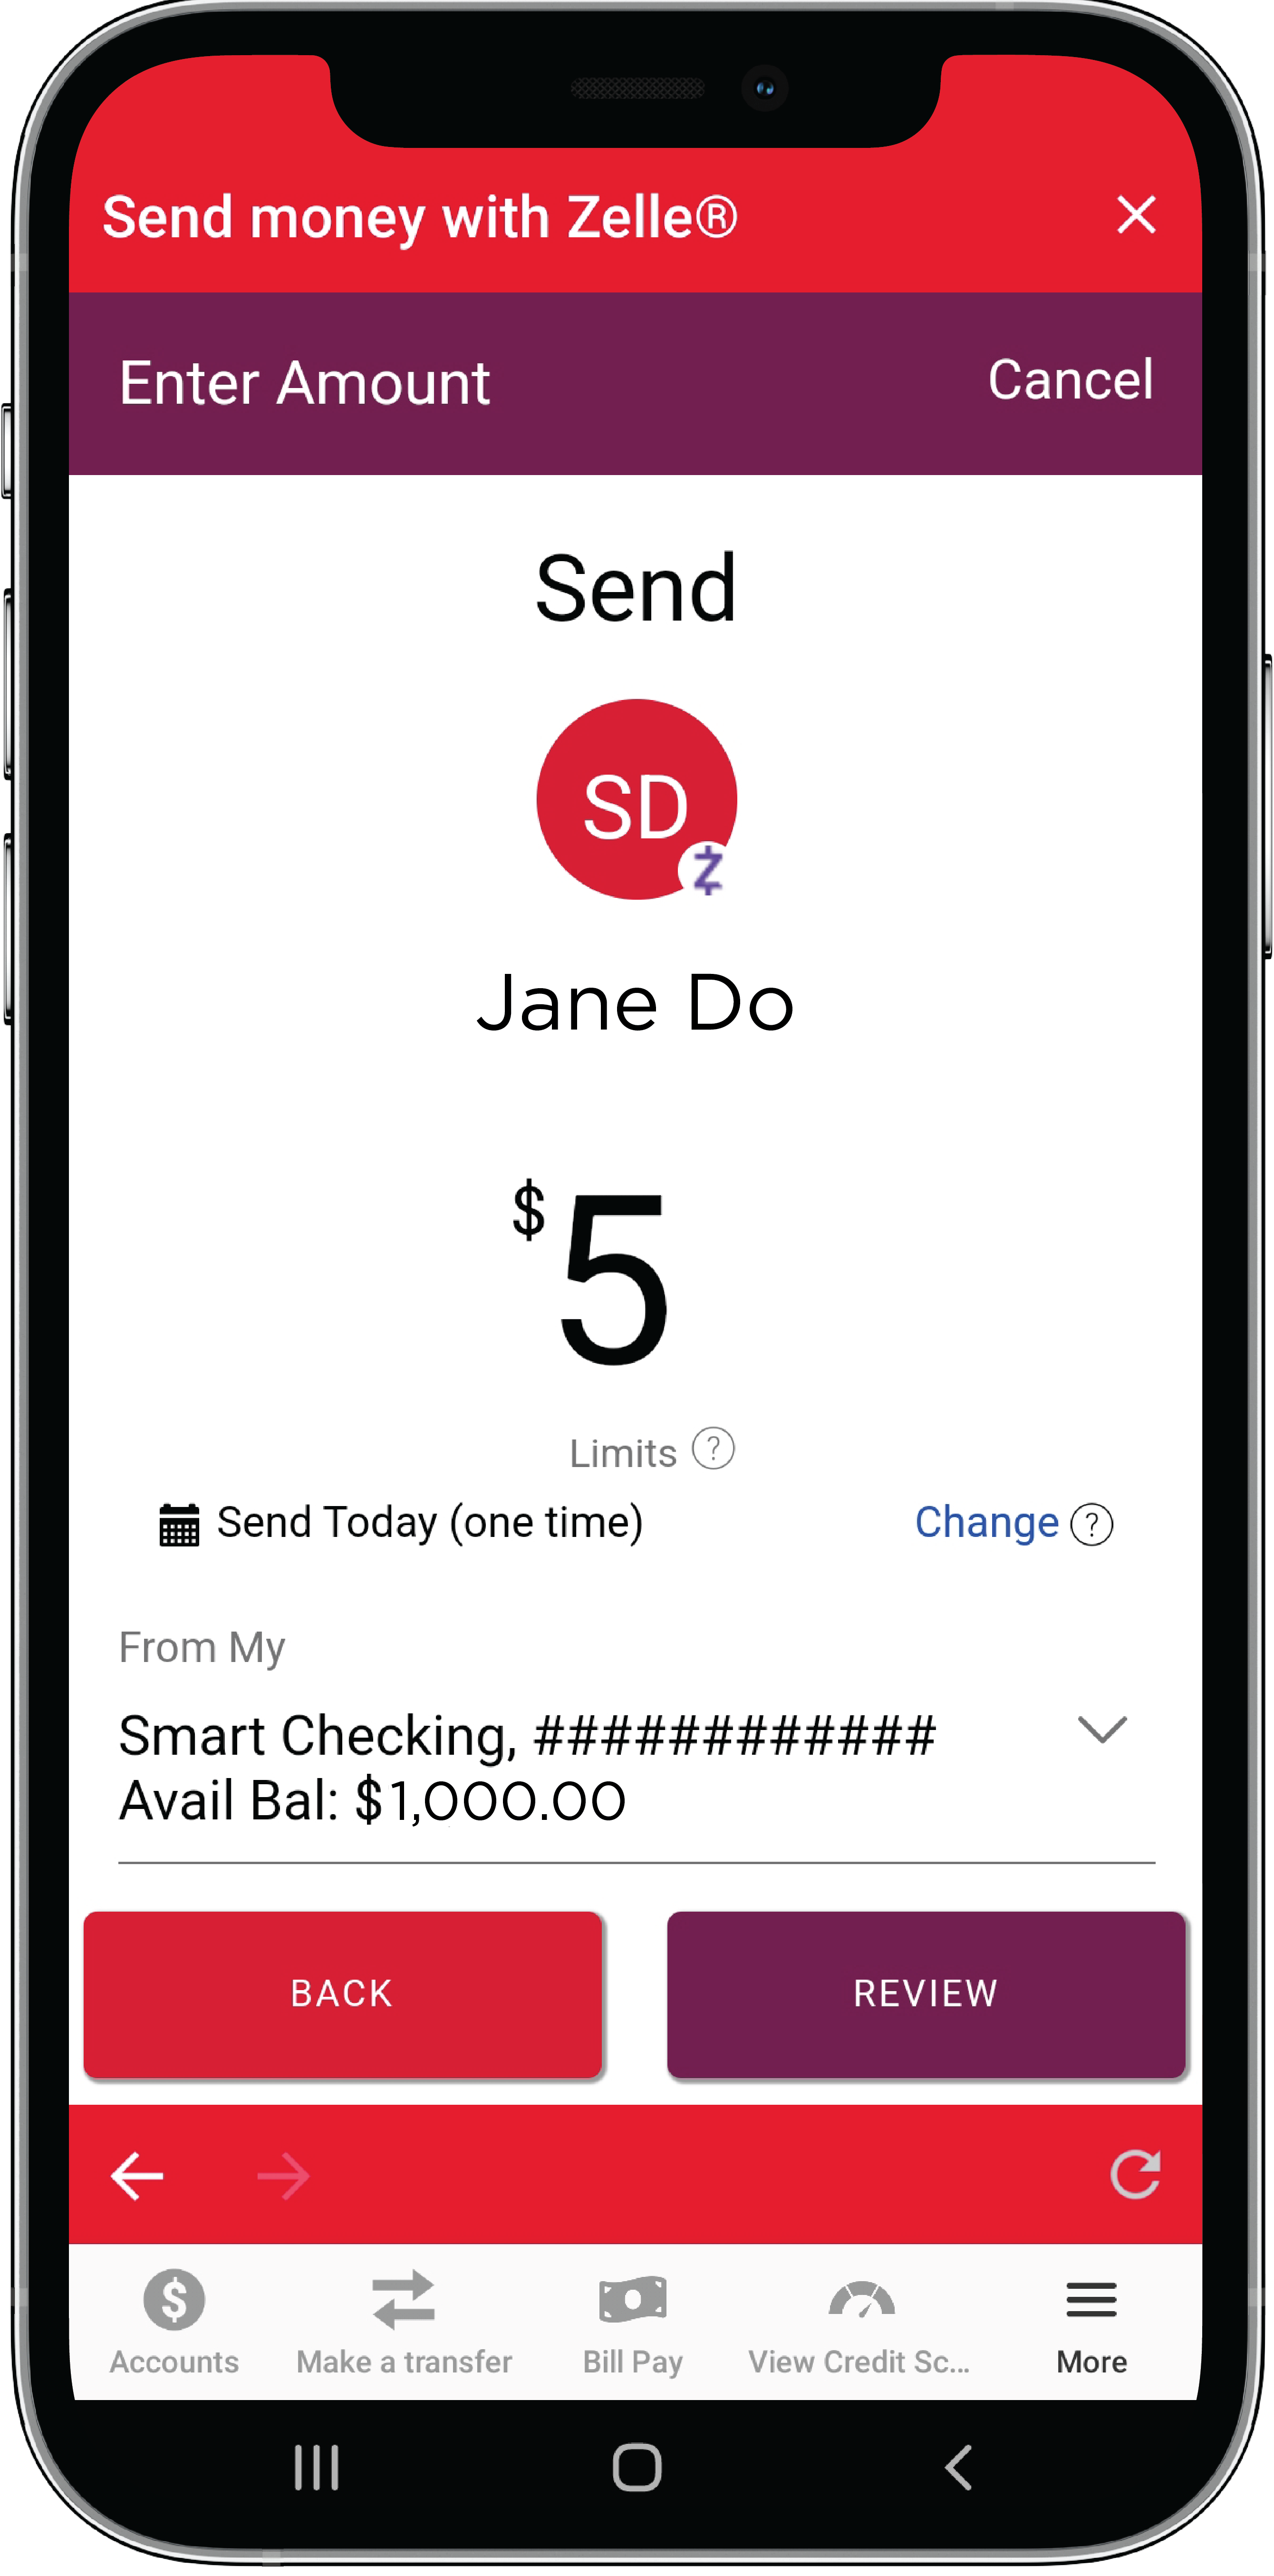 Send Money with Zelle®